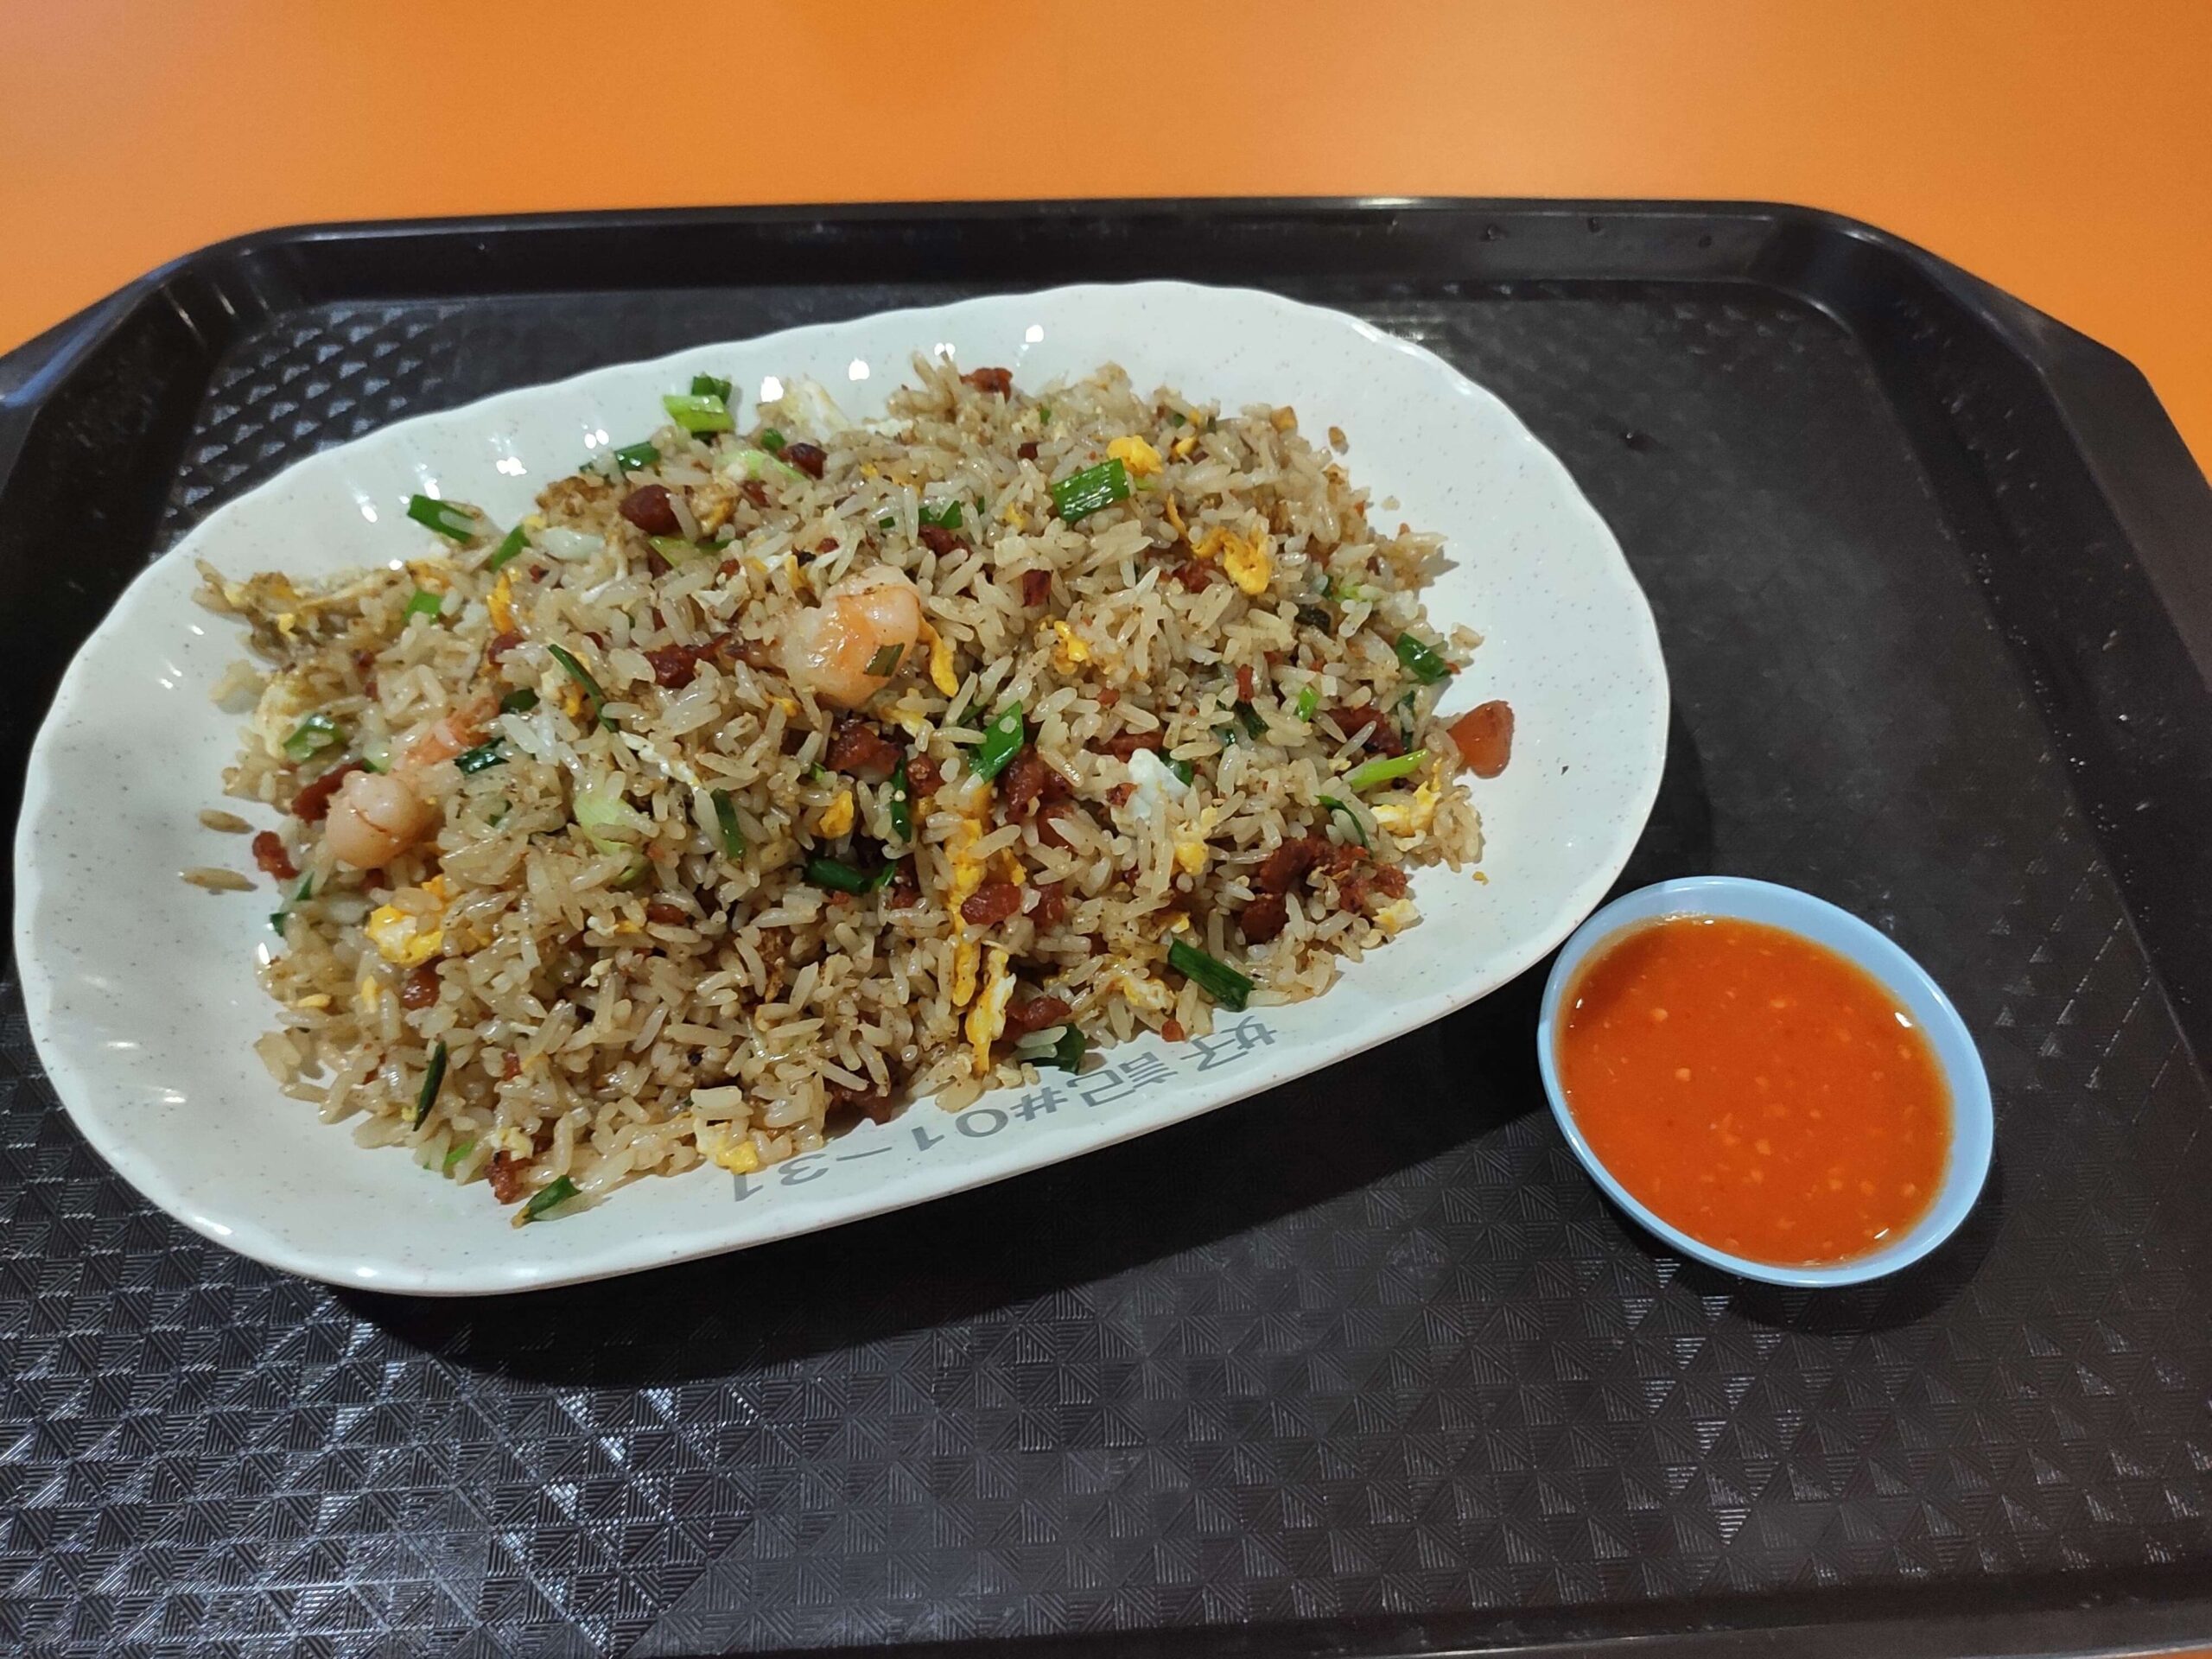 Ho Kee Fried Rice: Yang Zhou Fried Rice with Chilli